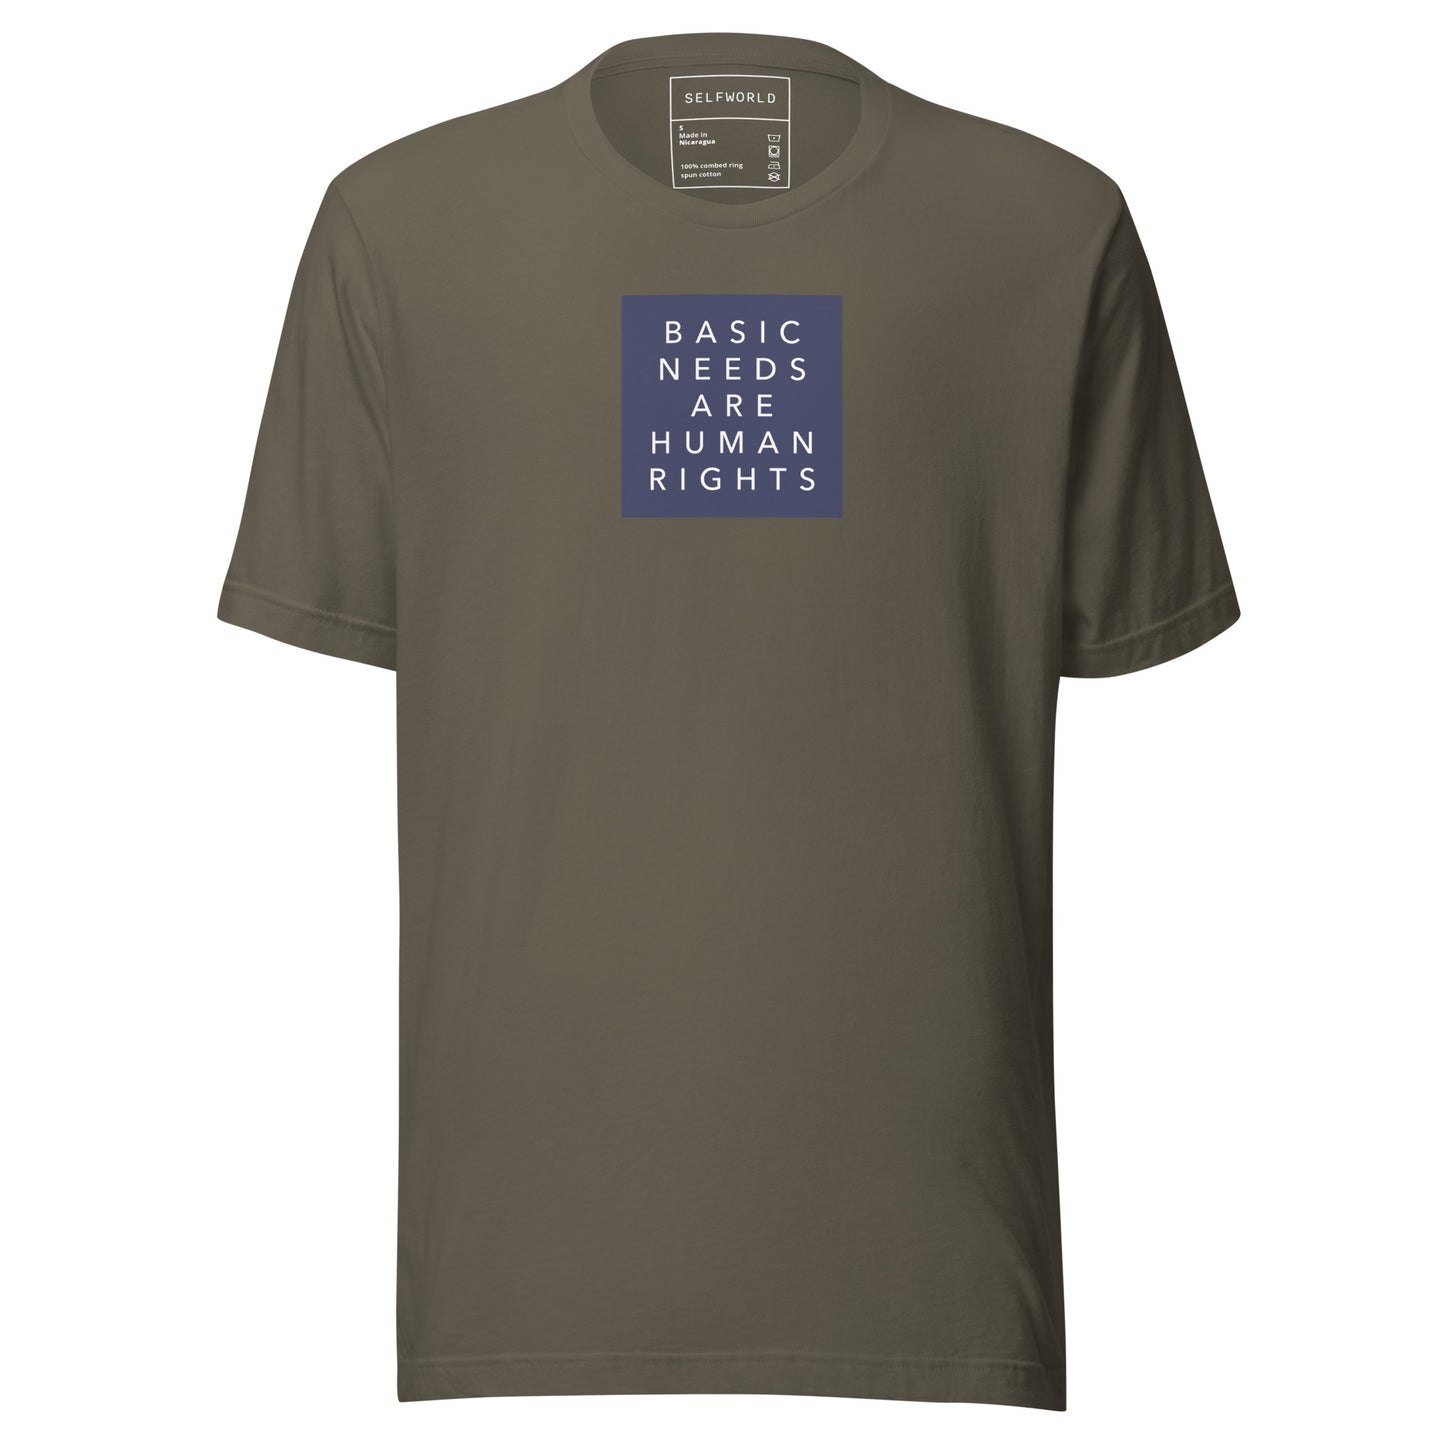 Basic Needs are Human Rights - Unisex t-shirt